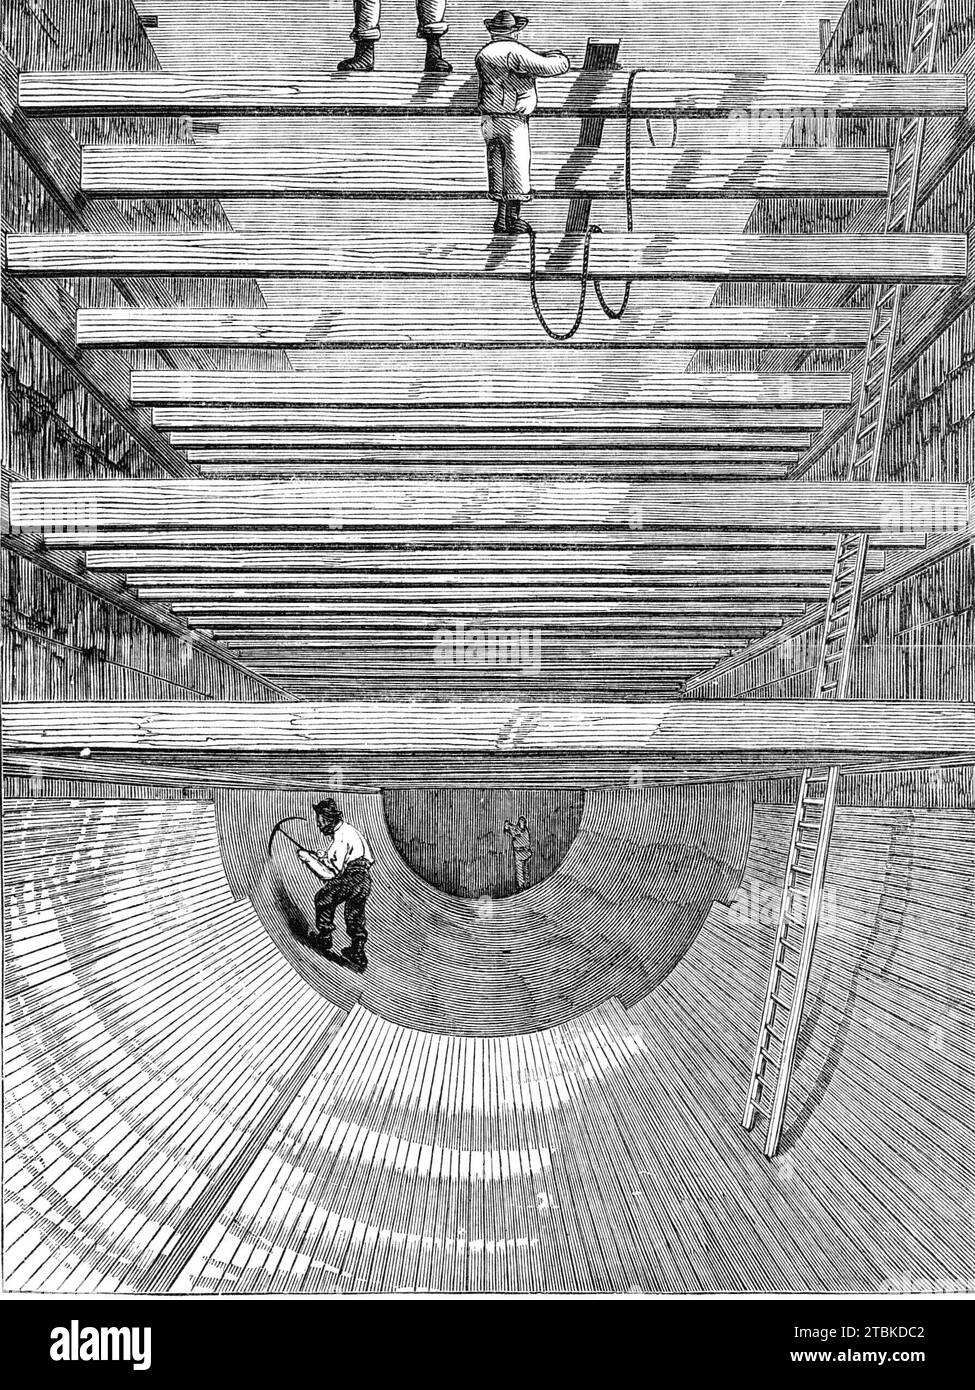 London Main Drainage: constructing the invert for the southern high-level sewer, 1861. 'The northern outfall sewer is about five miles long....The remarkable manner in which the embankment or bed is formed upon which the tunnels are to be built will be best understood by reference to our Illustration. The whole of the upper soil is first excavated, then a solid embankment of concrete is formed. In some places this embankment is as much as twenty feet in depth and one hundred feet in width. It is formed by carrying out a staging upon which several lines of rails are laid. The concrete is made o Stock Photo